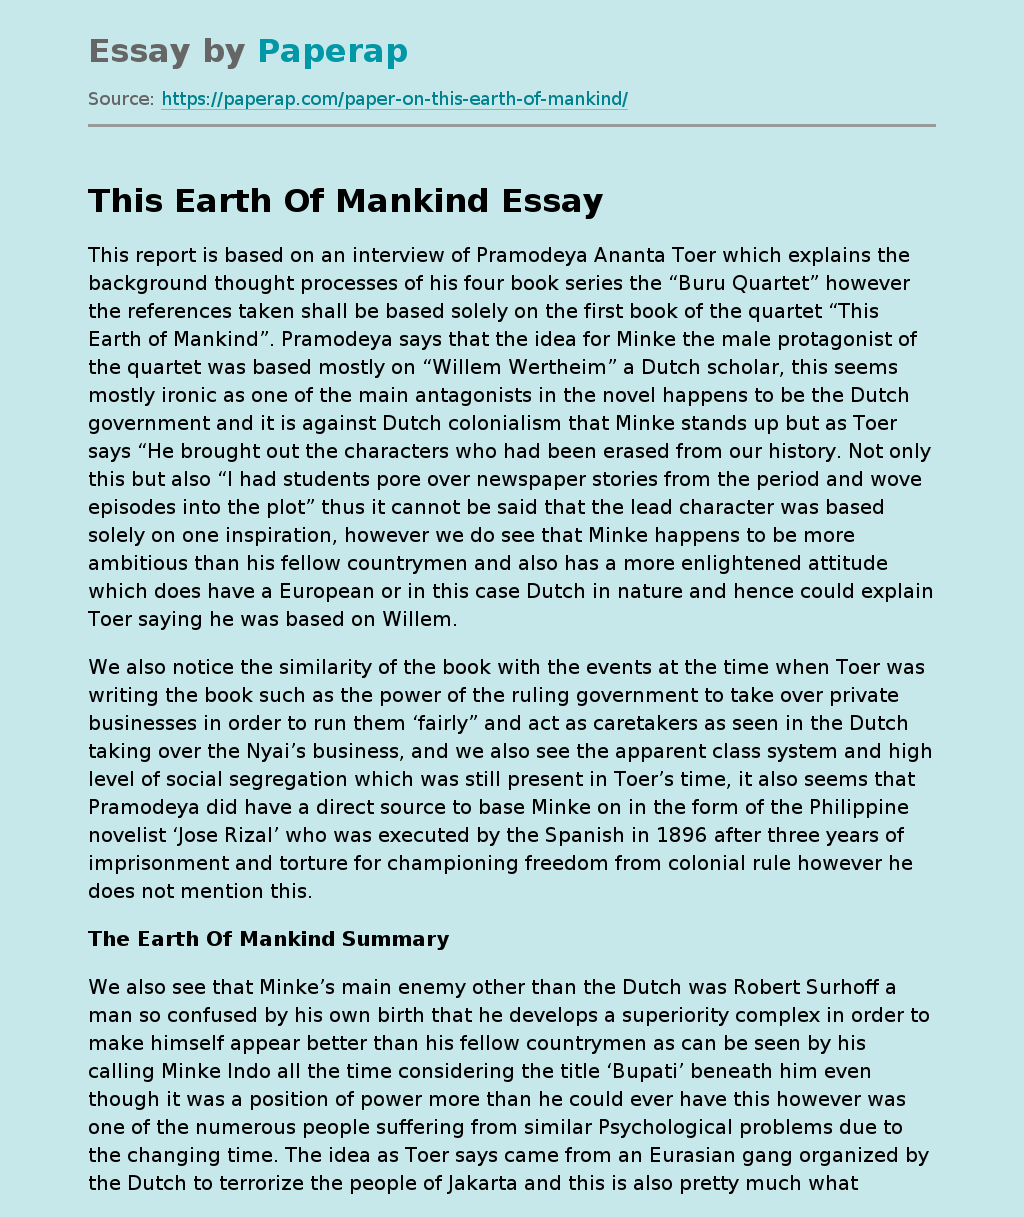 The Earth Of Mankind Summary